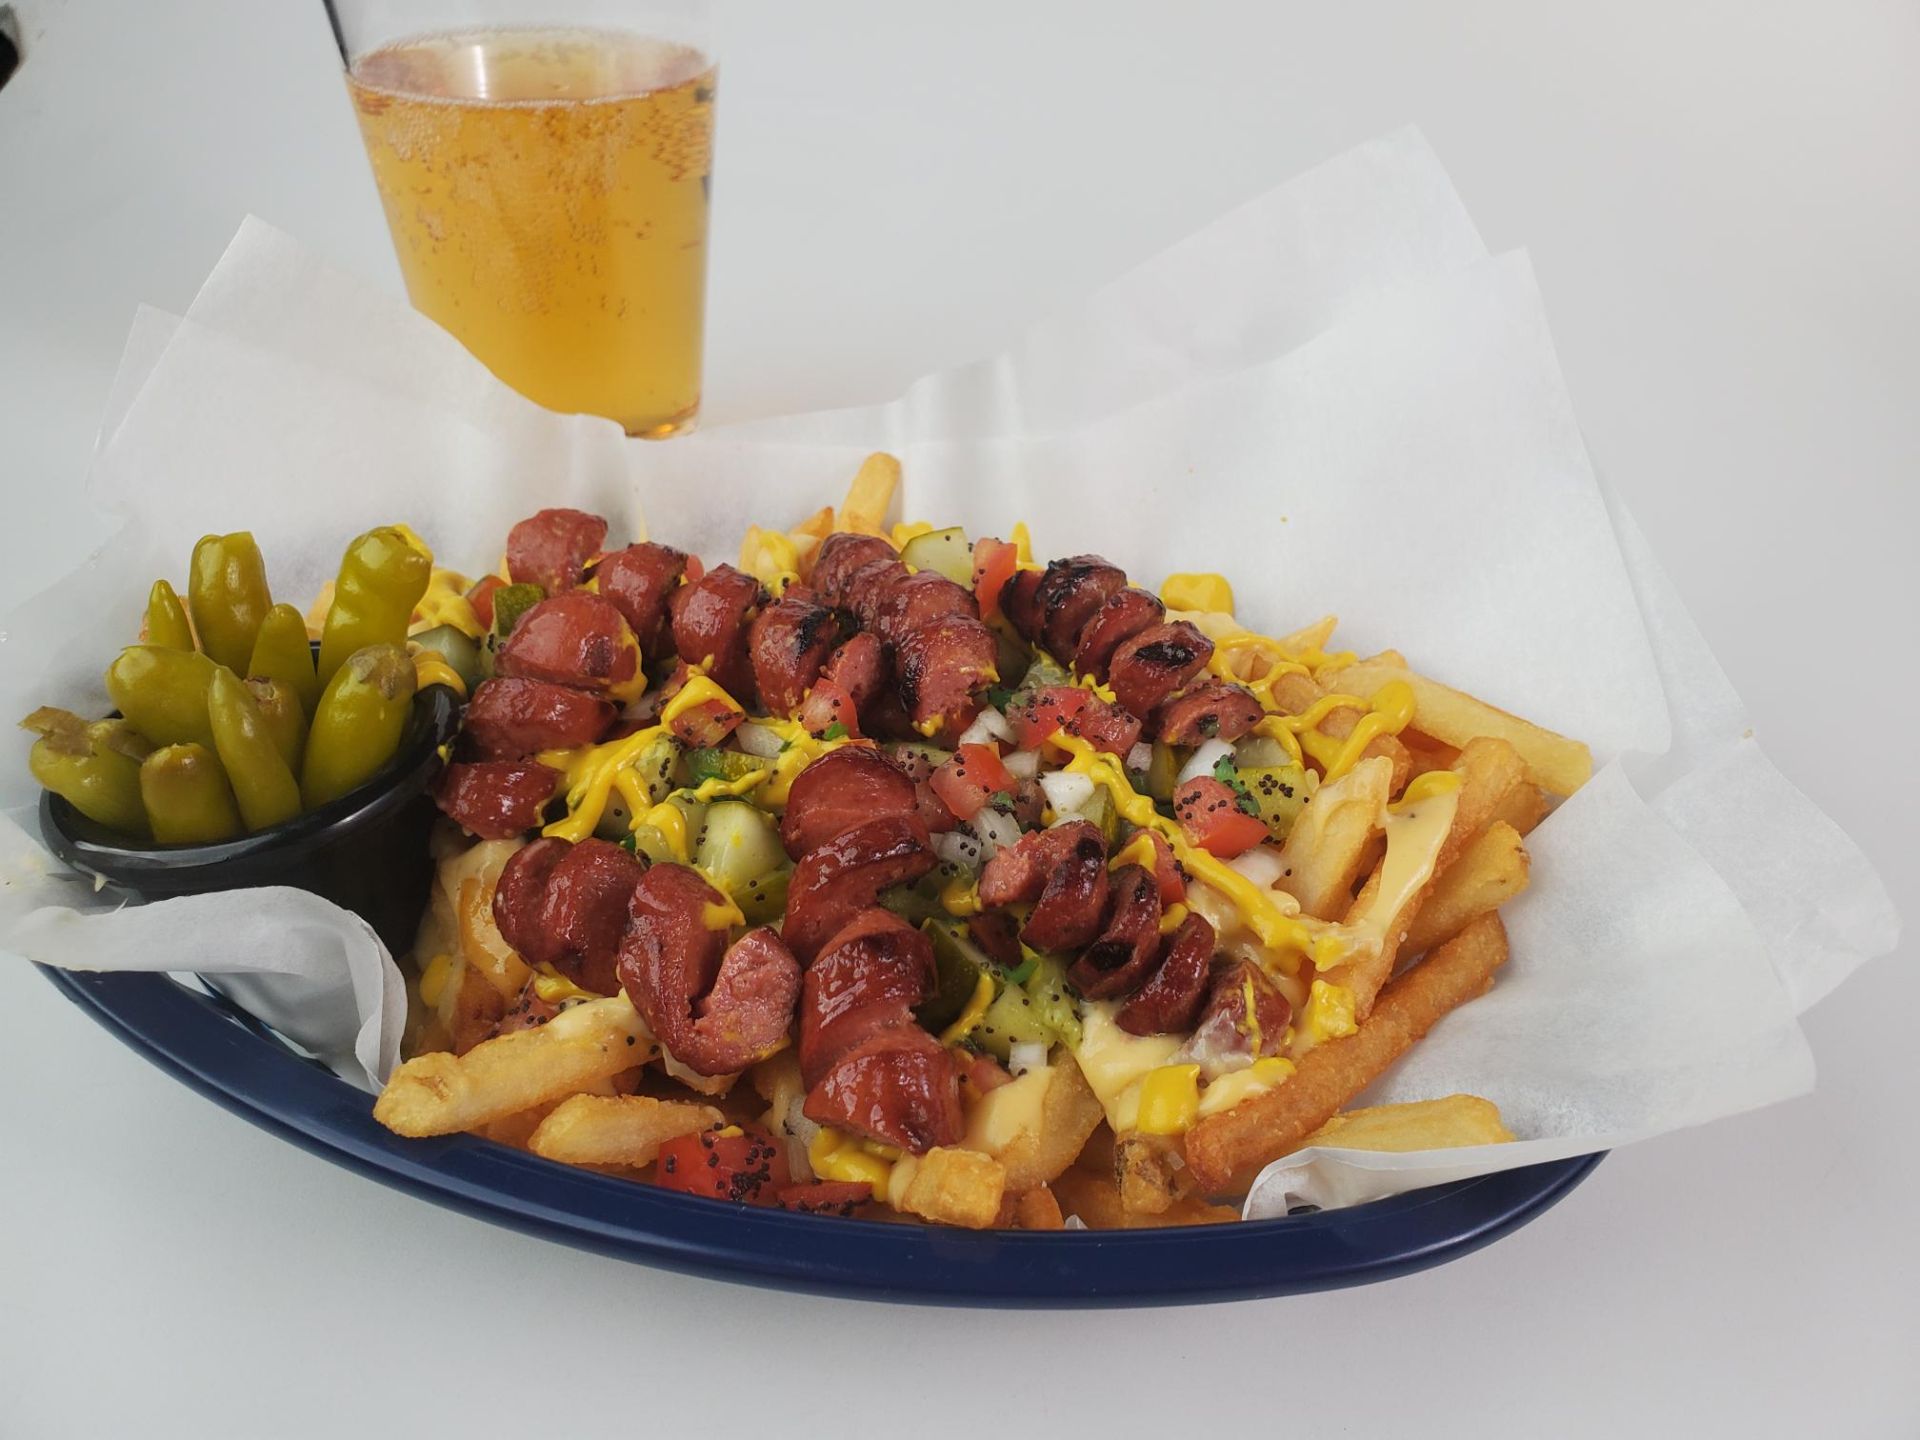 poutine with hot dogs, served with a cold beer